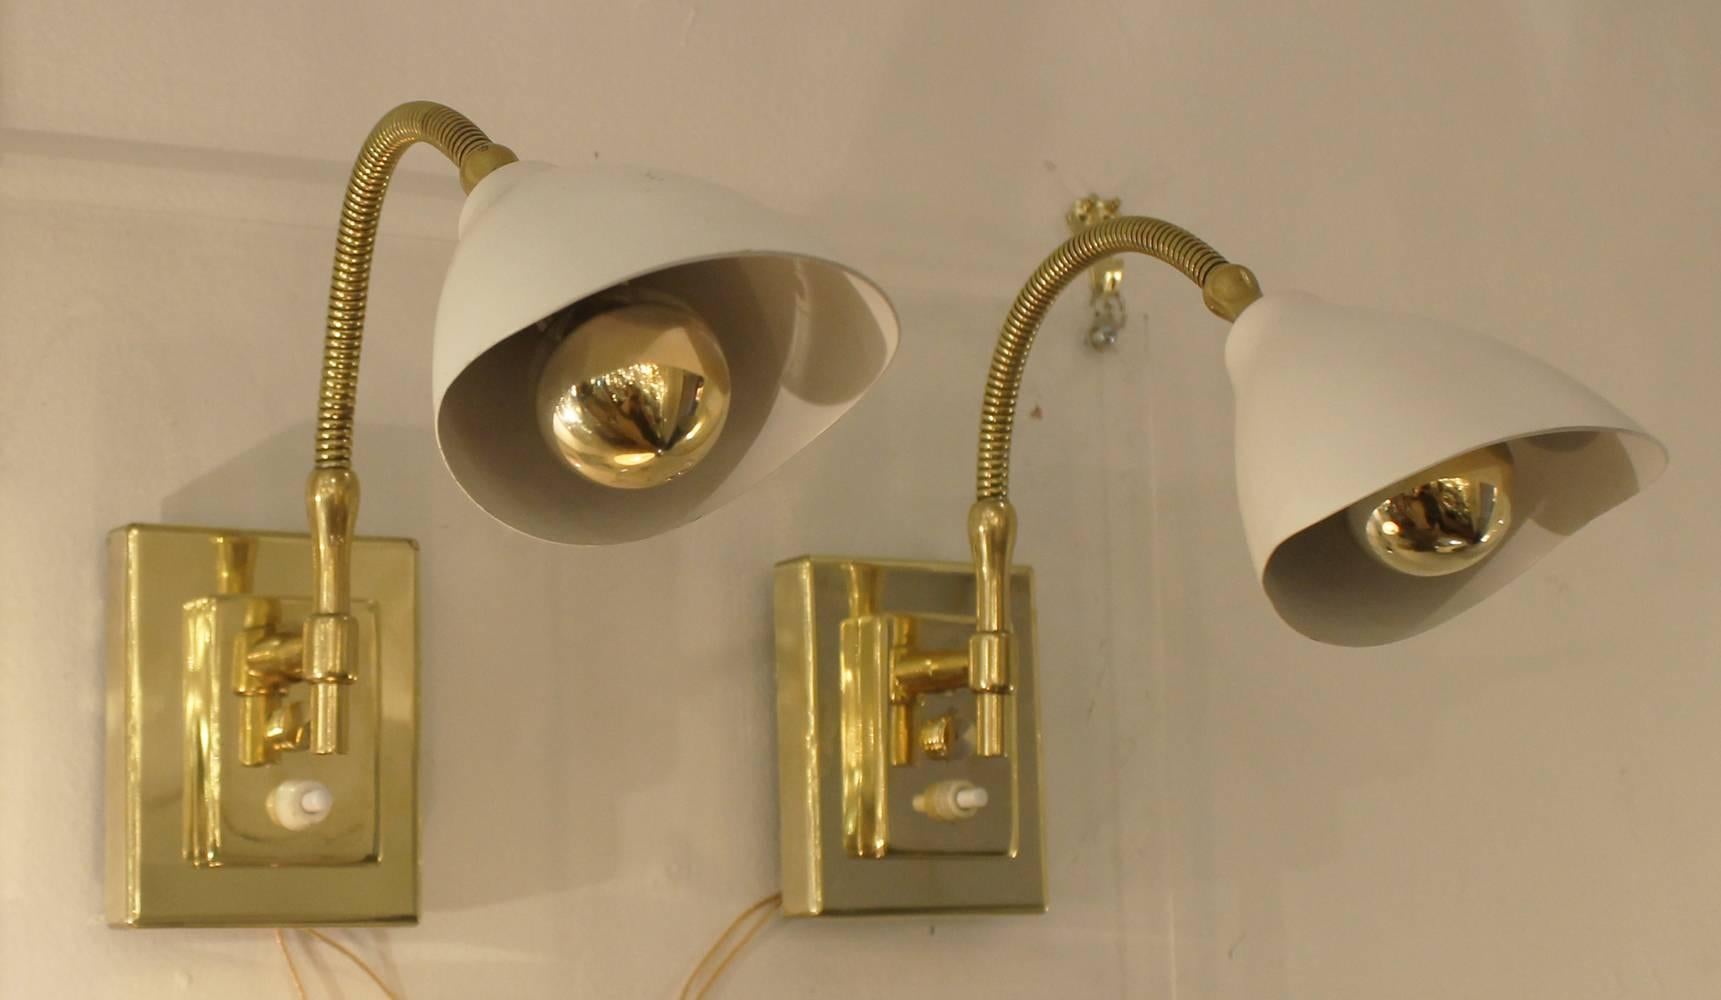 Adjustable arm sconces attributed to Gino Sarfatti. All brass except for the shades which are white painted aluminum. Each hold one candelabra socket and has a push switch on the back plate.
